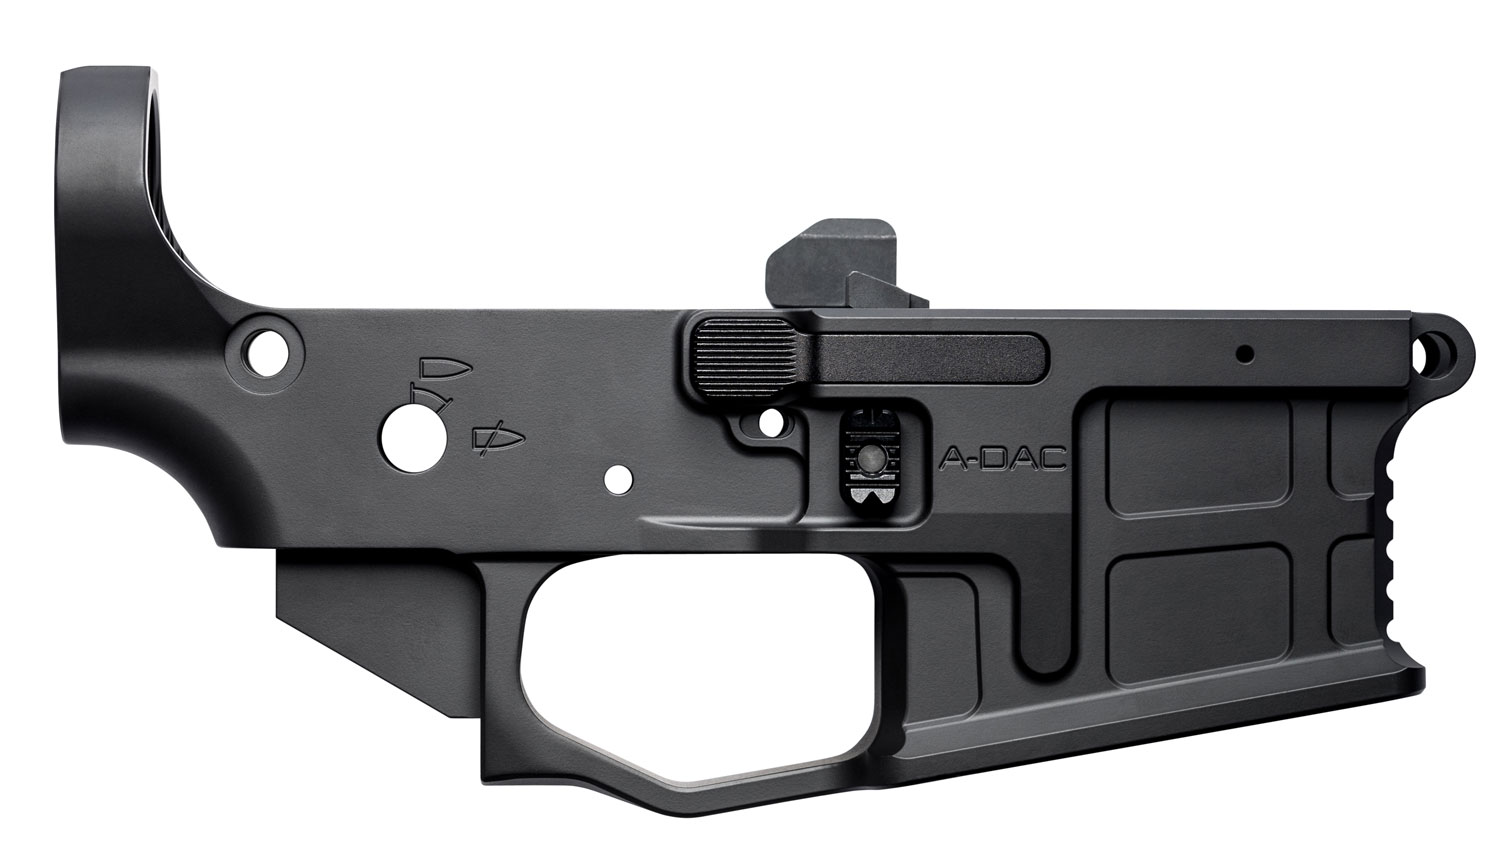 Radian Weapons R0166 AX556 Lower Receiver Multi-Caliber 7075-T6 Aluminum Radian Black for AR-15